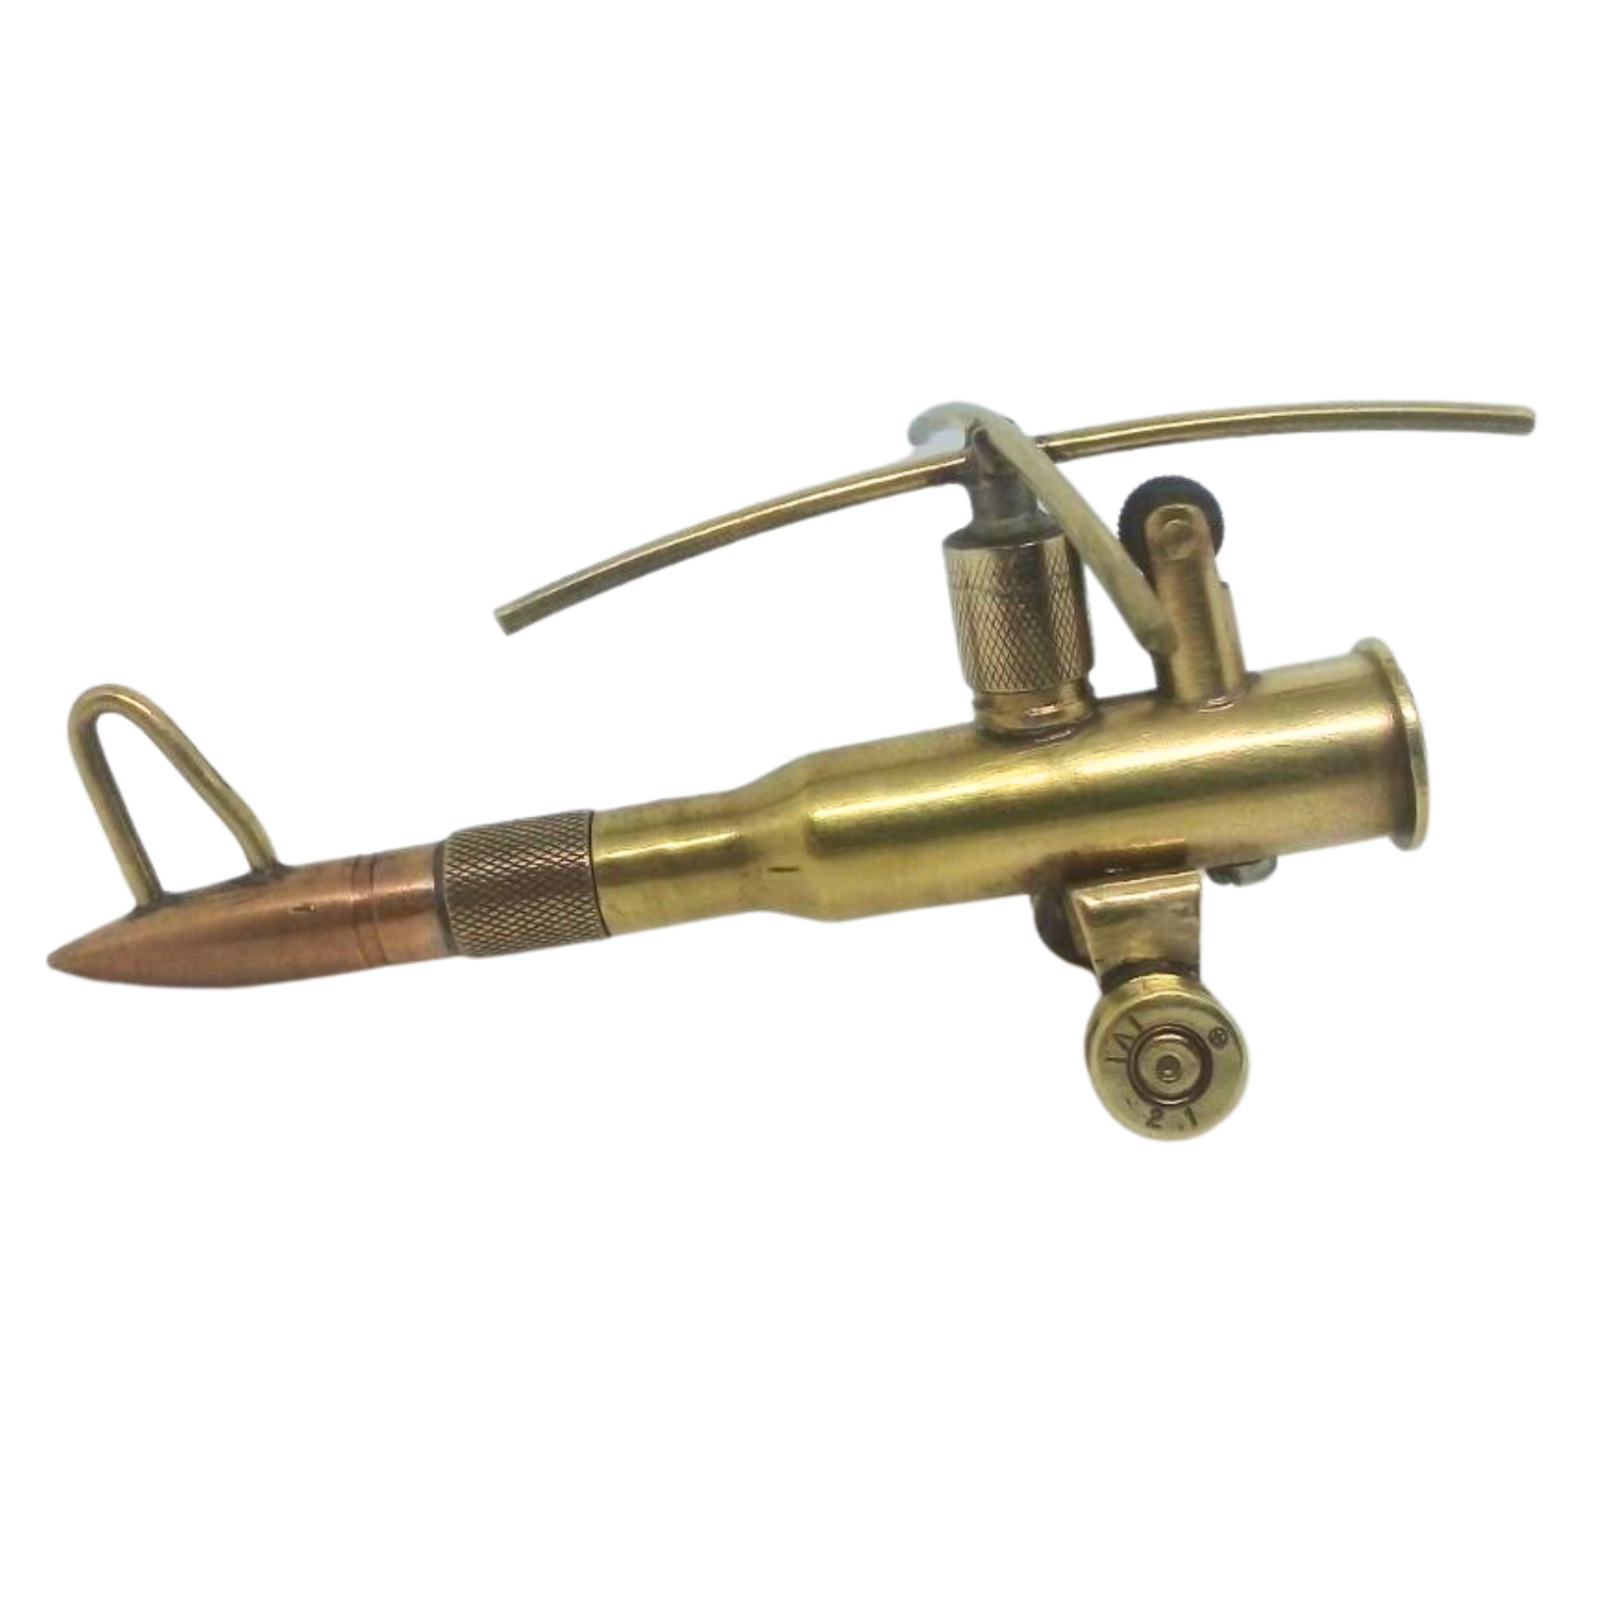 Vintage Style Steampunk Trench Art Handmade Petrol Cigarette Lighter Helicopter